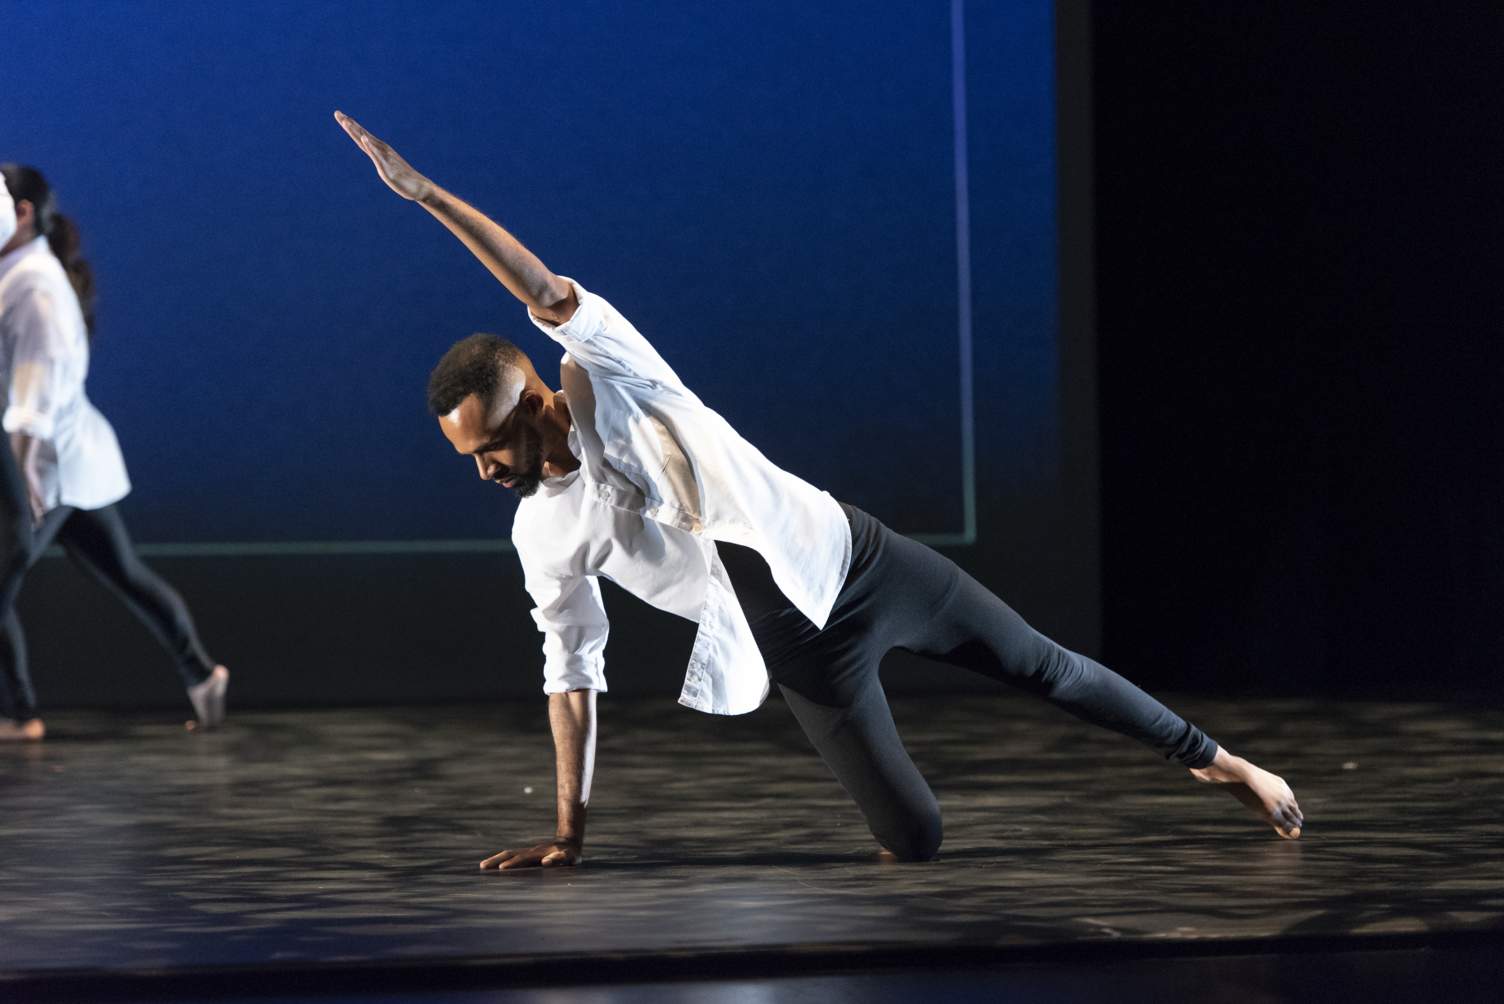 Man dancing on stage at Texas State University